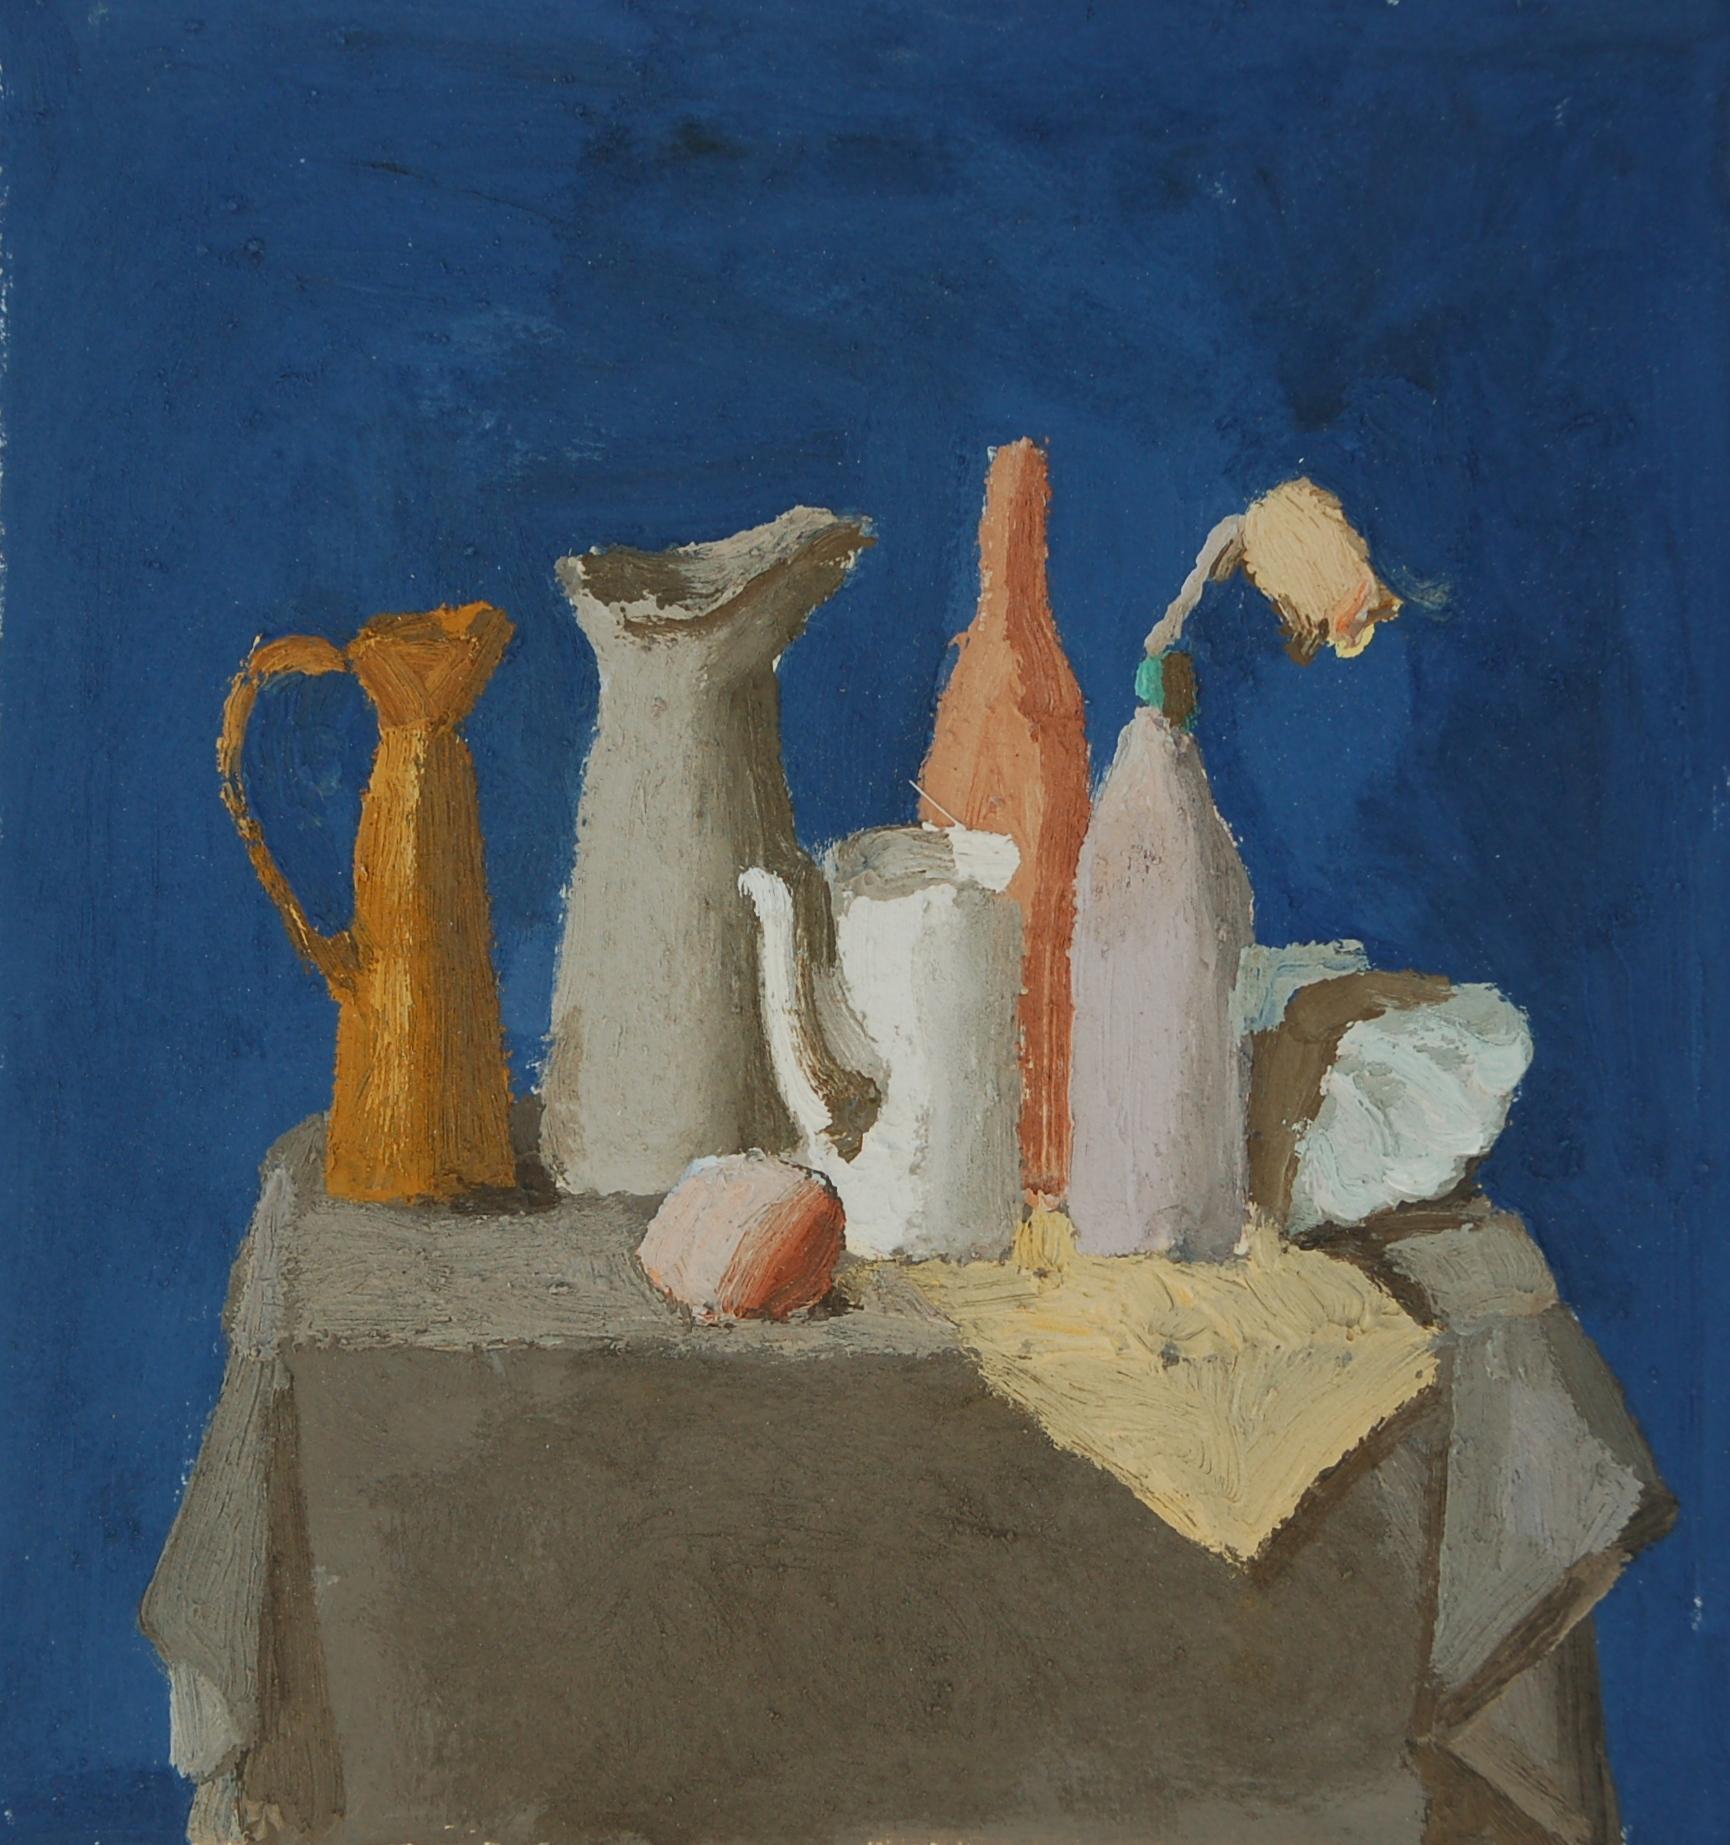 Still life on the blue background